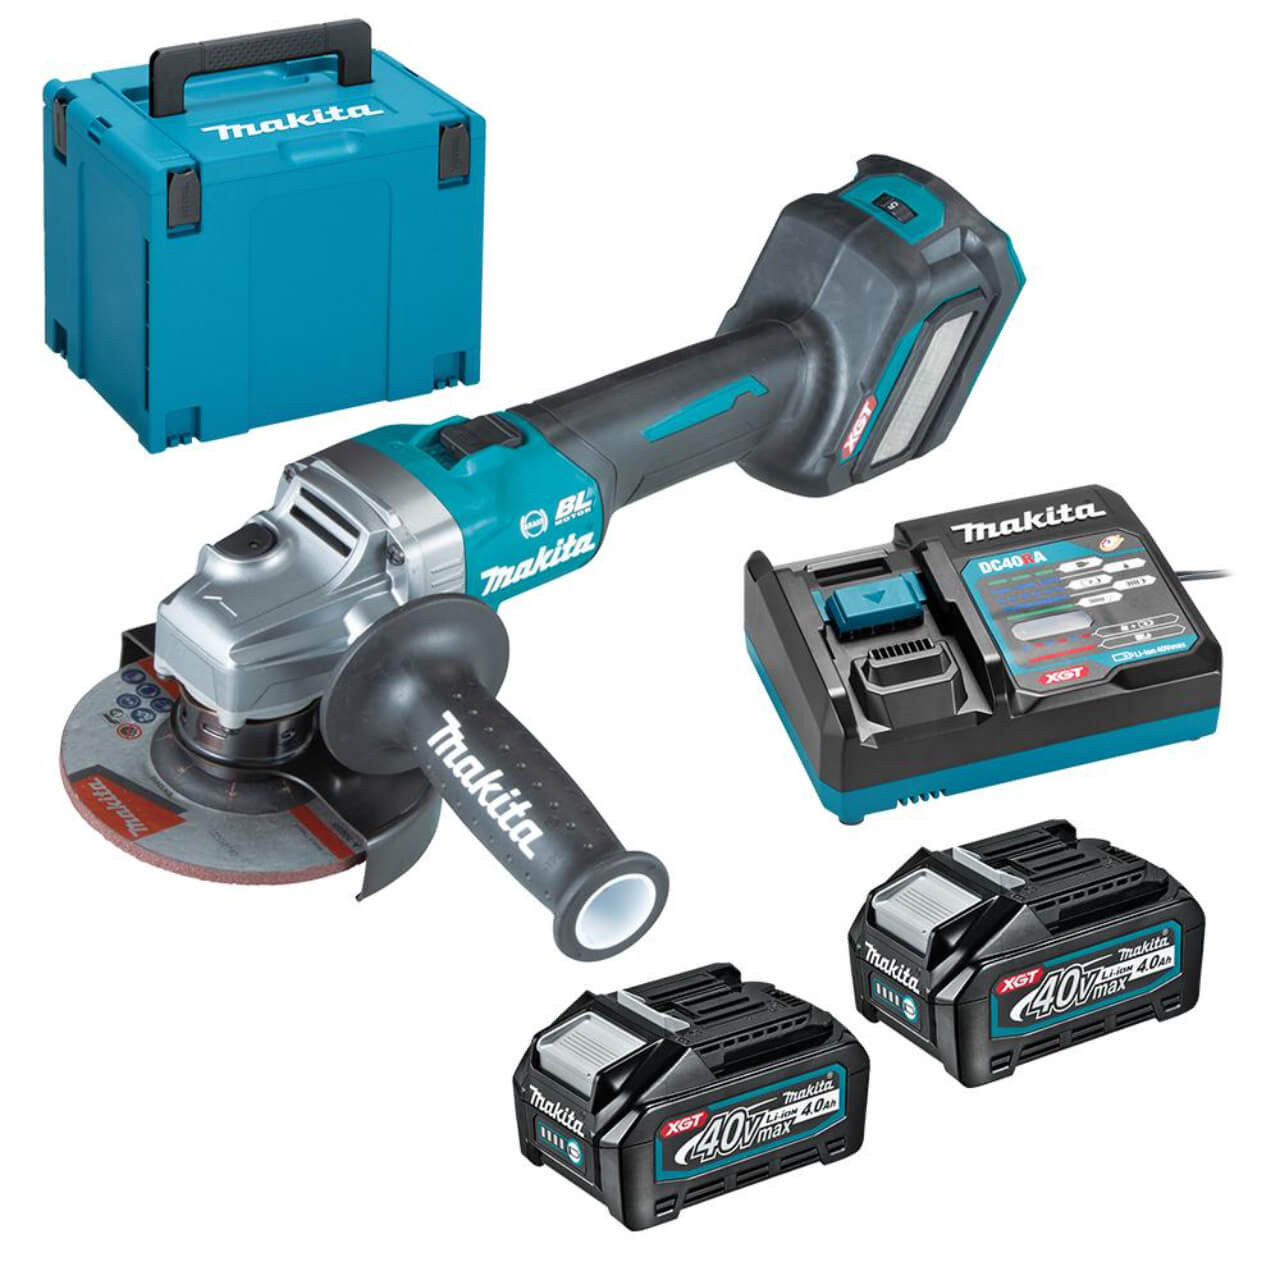 Makita 40V Max BRUSHLESS AWS* 125mm (5”) Angle Grinder. Slide Switch. Variable Speed - Includes 2 x 4.0Ah Batteries. Single Port Rapid Charger & Makpac Case Type 4